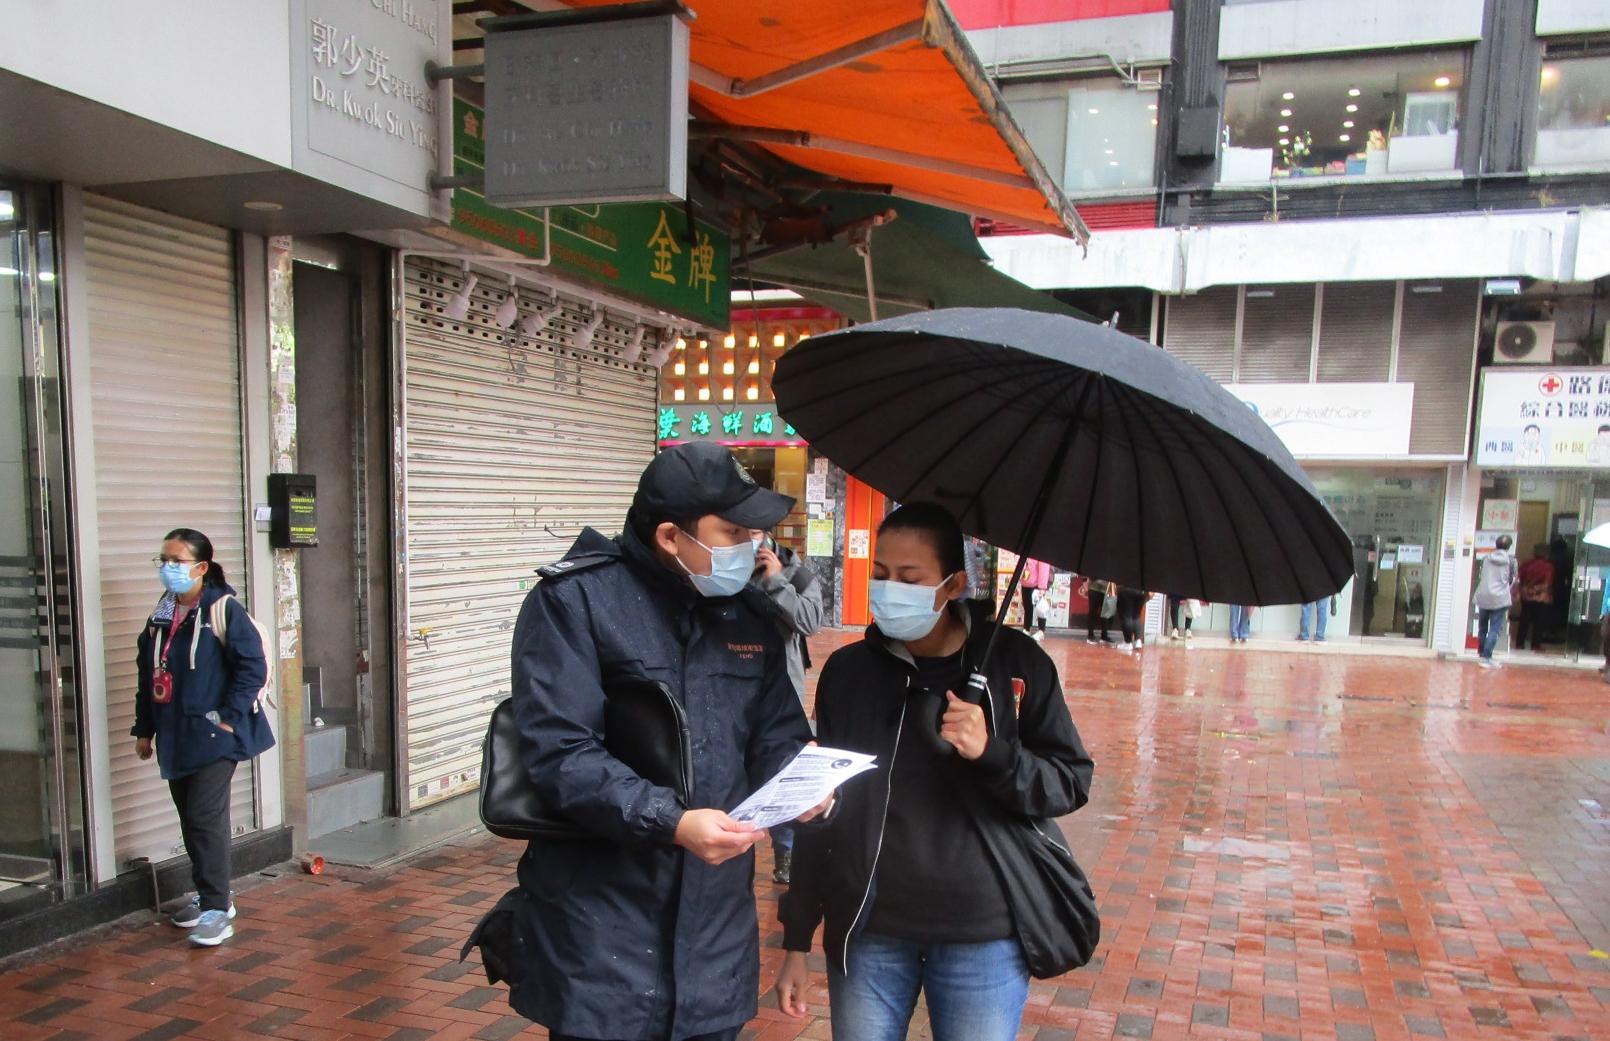 The Food and Environmental Hygiene Department conducted joint operations with several government departments yesterday (February 19) and today (February 20) to carry out publicity and educational work at popular places in different districts where foreign domestic helpers commonly gather, appealing to them to raise awareness of epidemic prevention and comply with the various anti-epidemic regulations and restrictions.